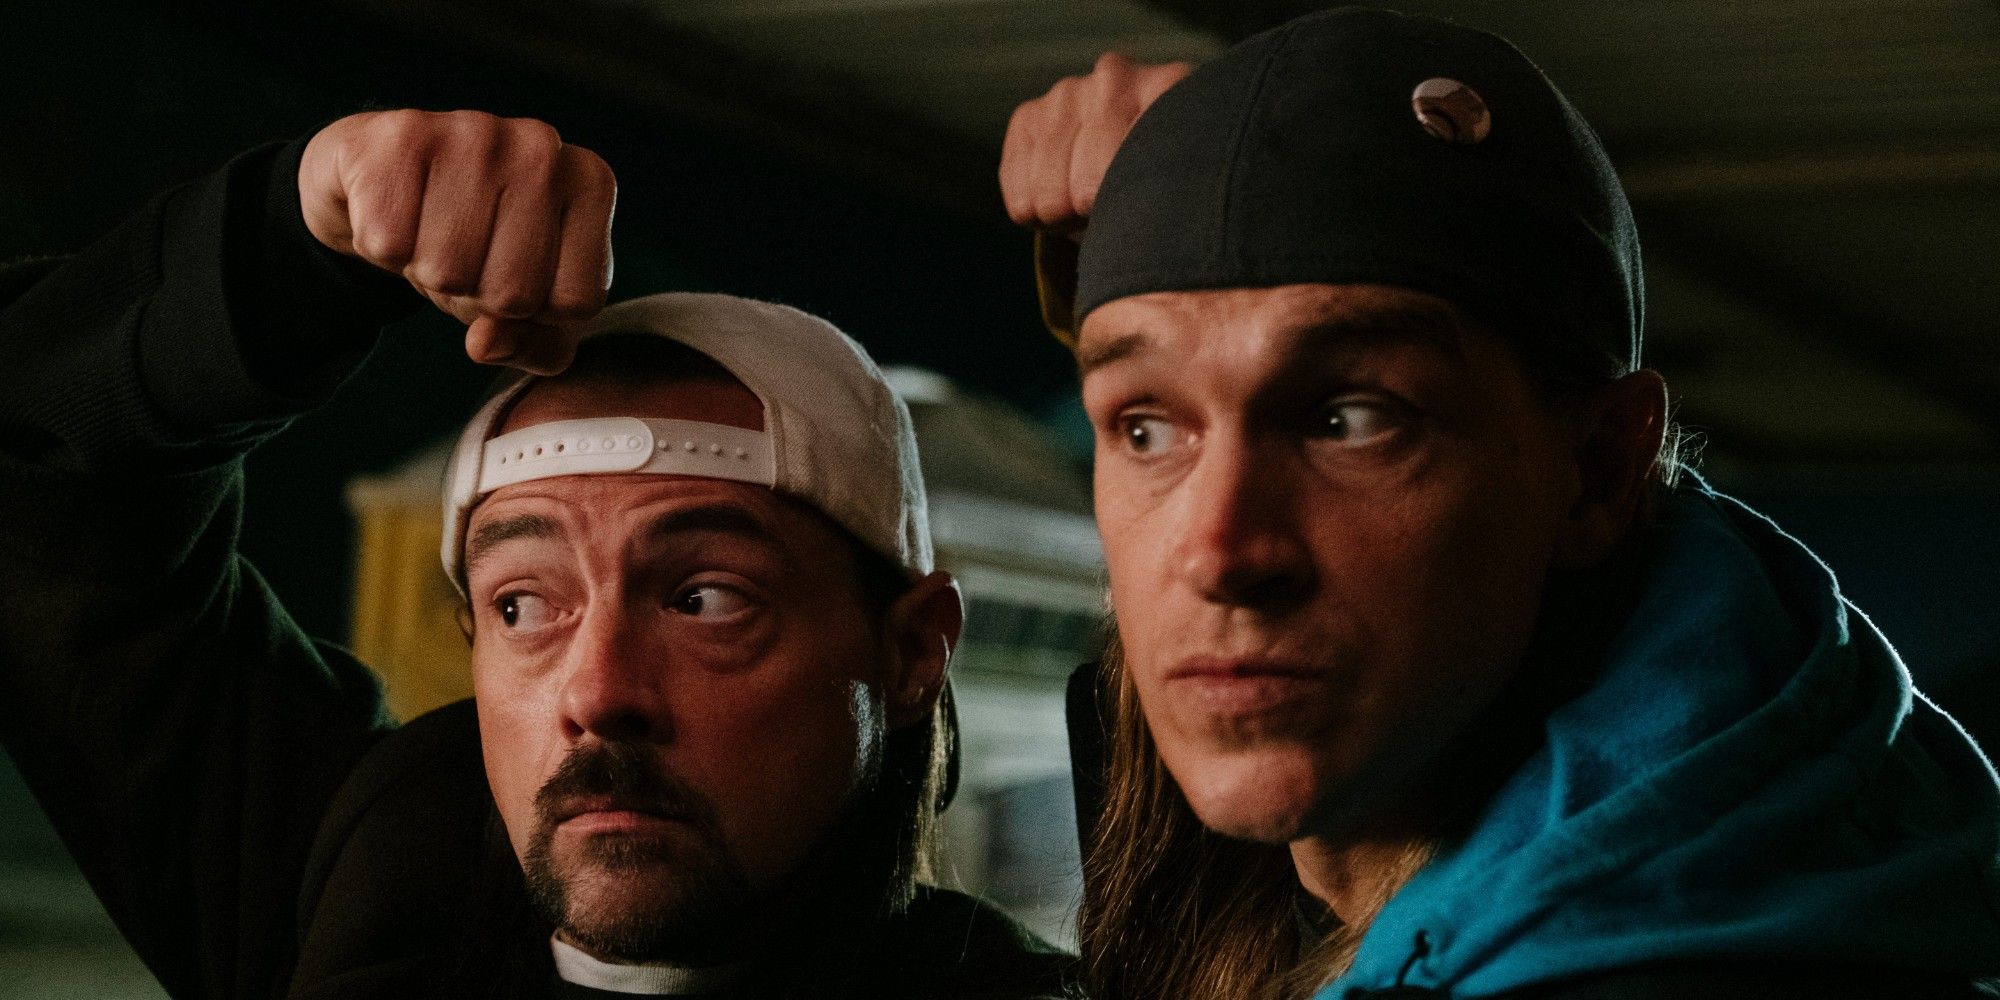 Kevin Smith and Jason Mewes from Jay and Silent Bob Reboot